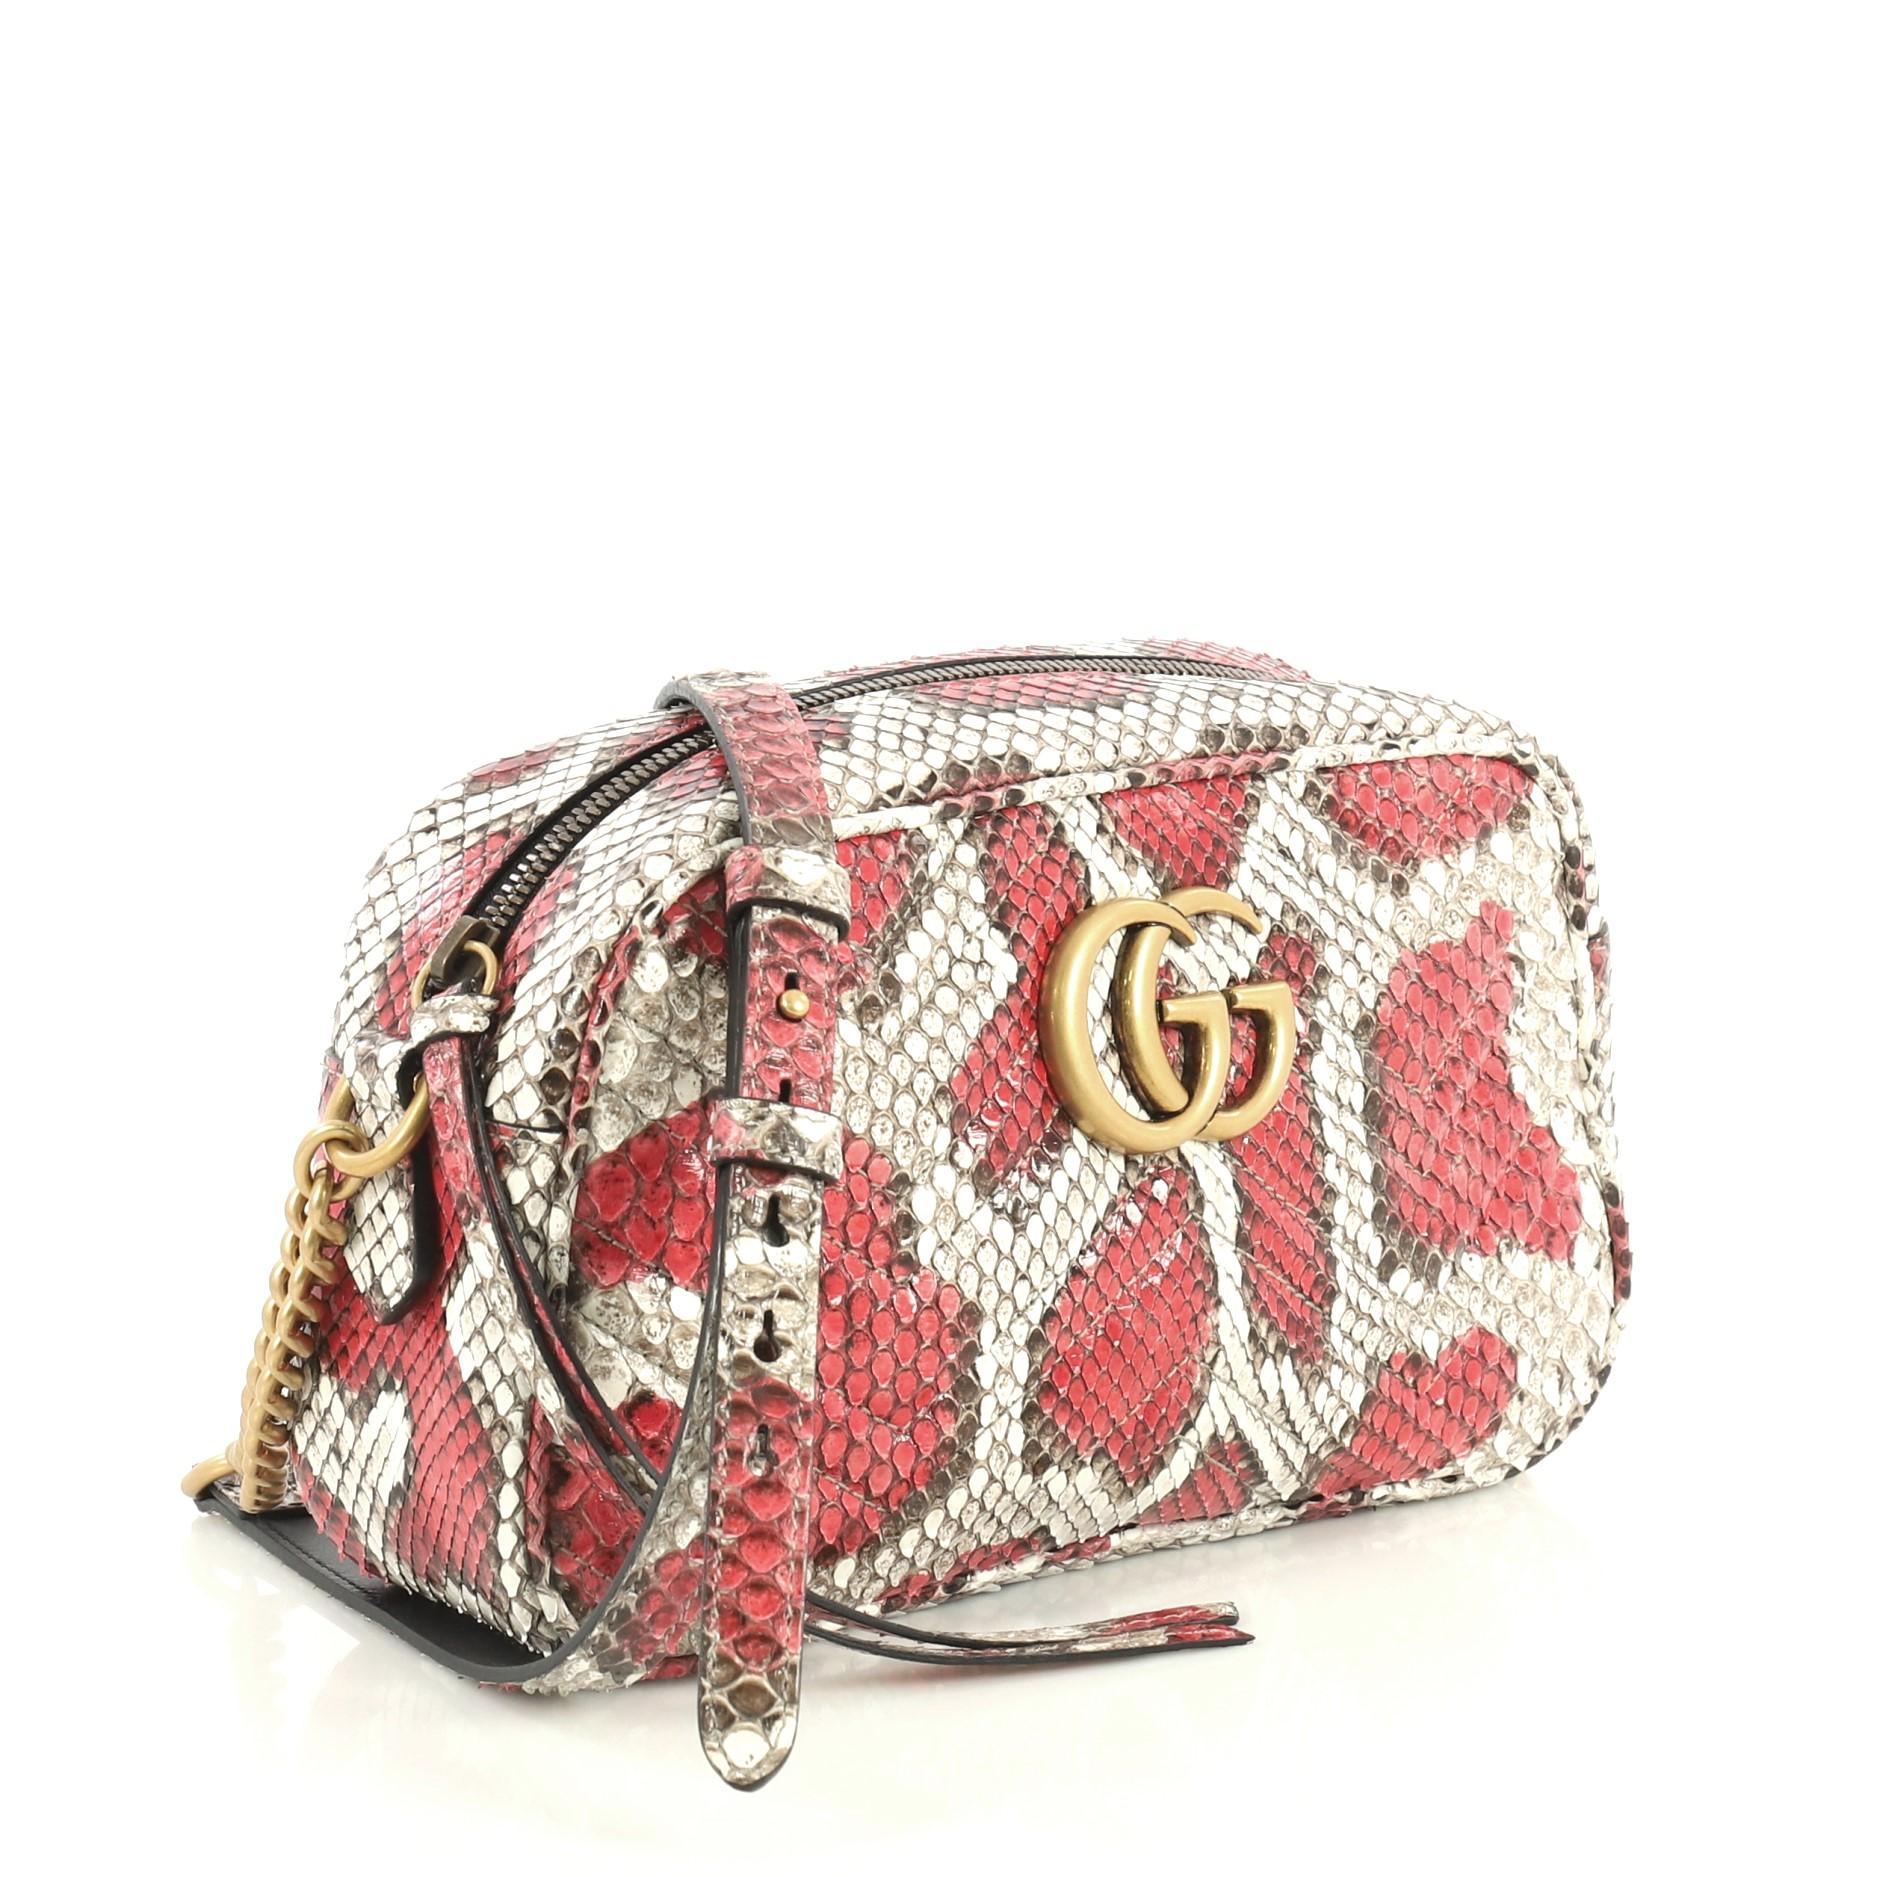 This Gucci GG Marmont Shoulder Bag Matelasse Python Small, crafted from genuine gray, red, and multicolor printed python skin, features chain links with adjustable shoulder strap, GG logo at the front, and aged gold-tone hardware. Its zip closure